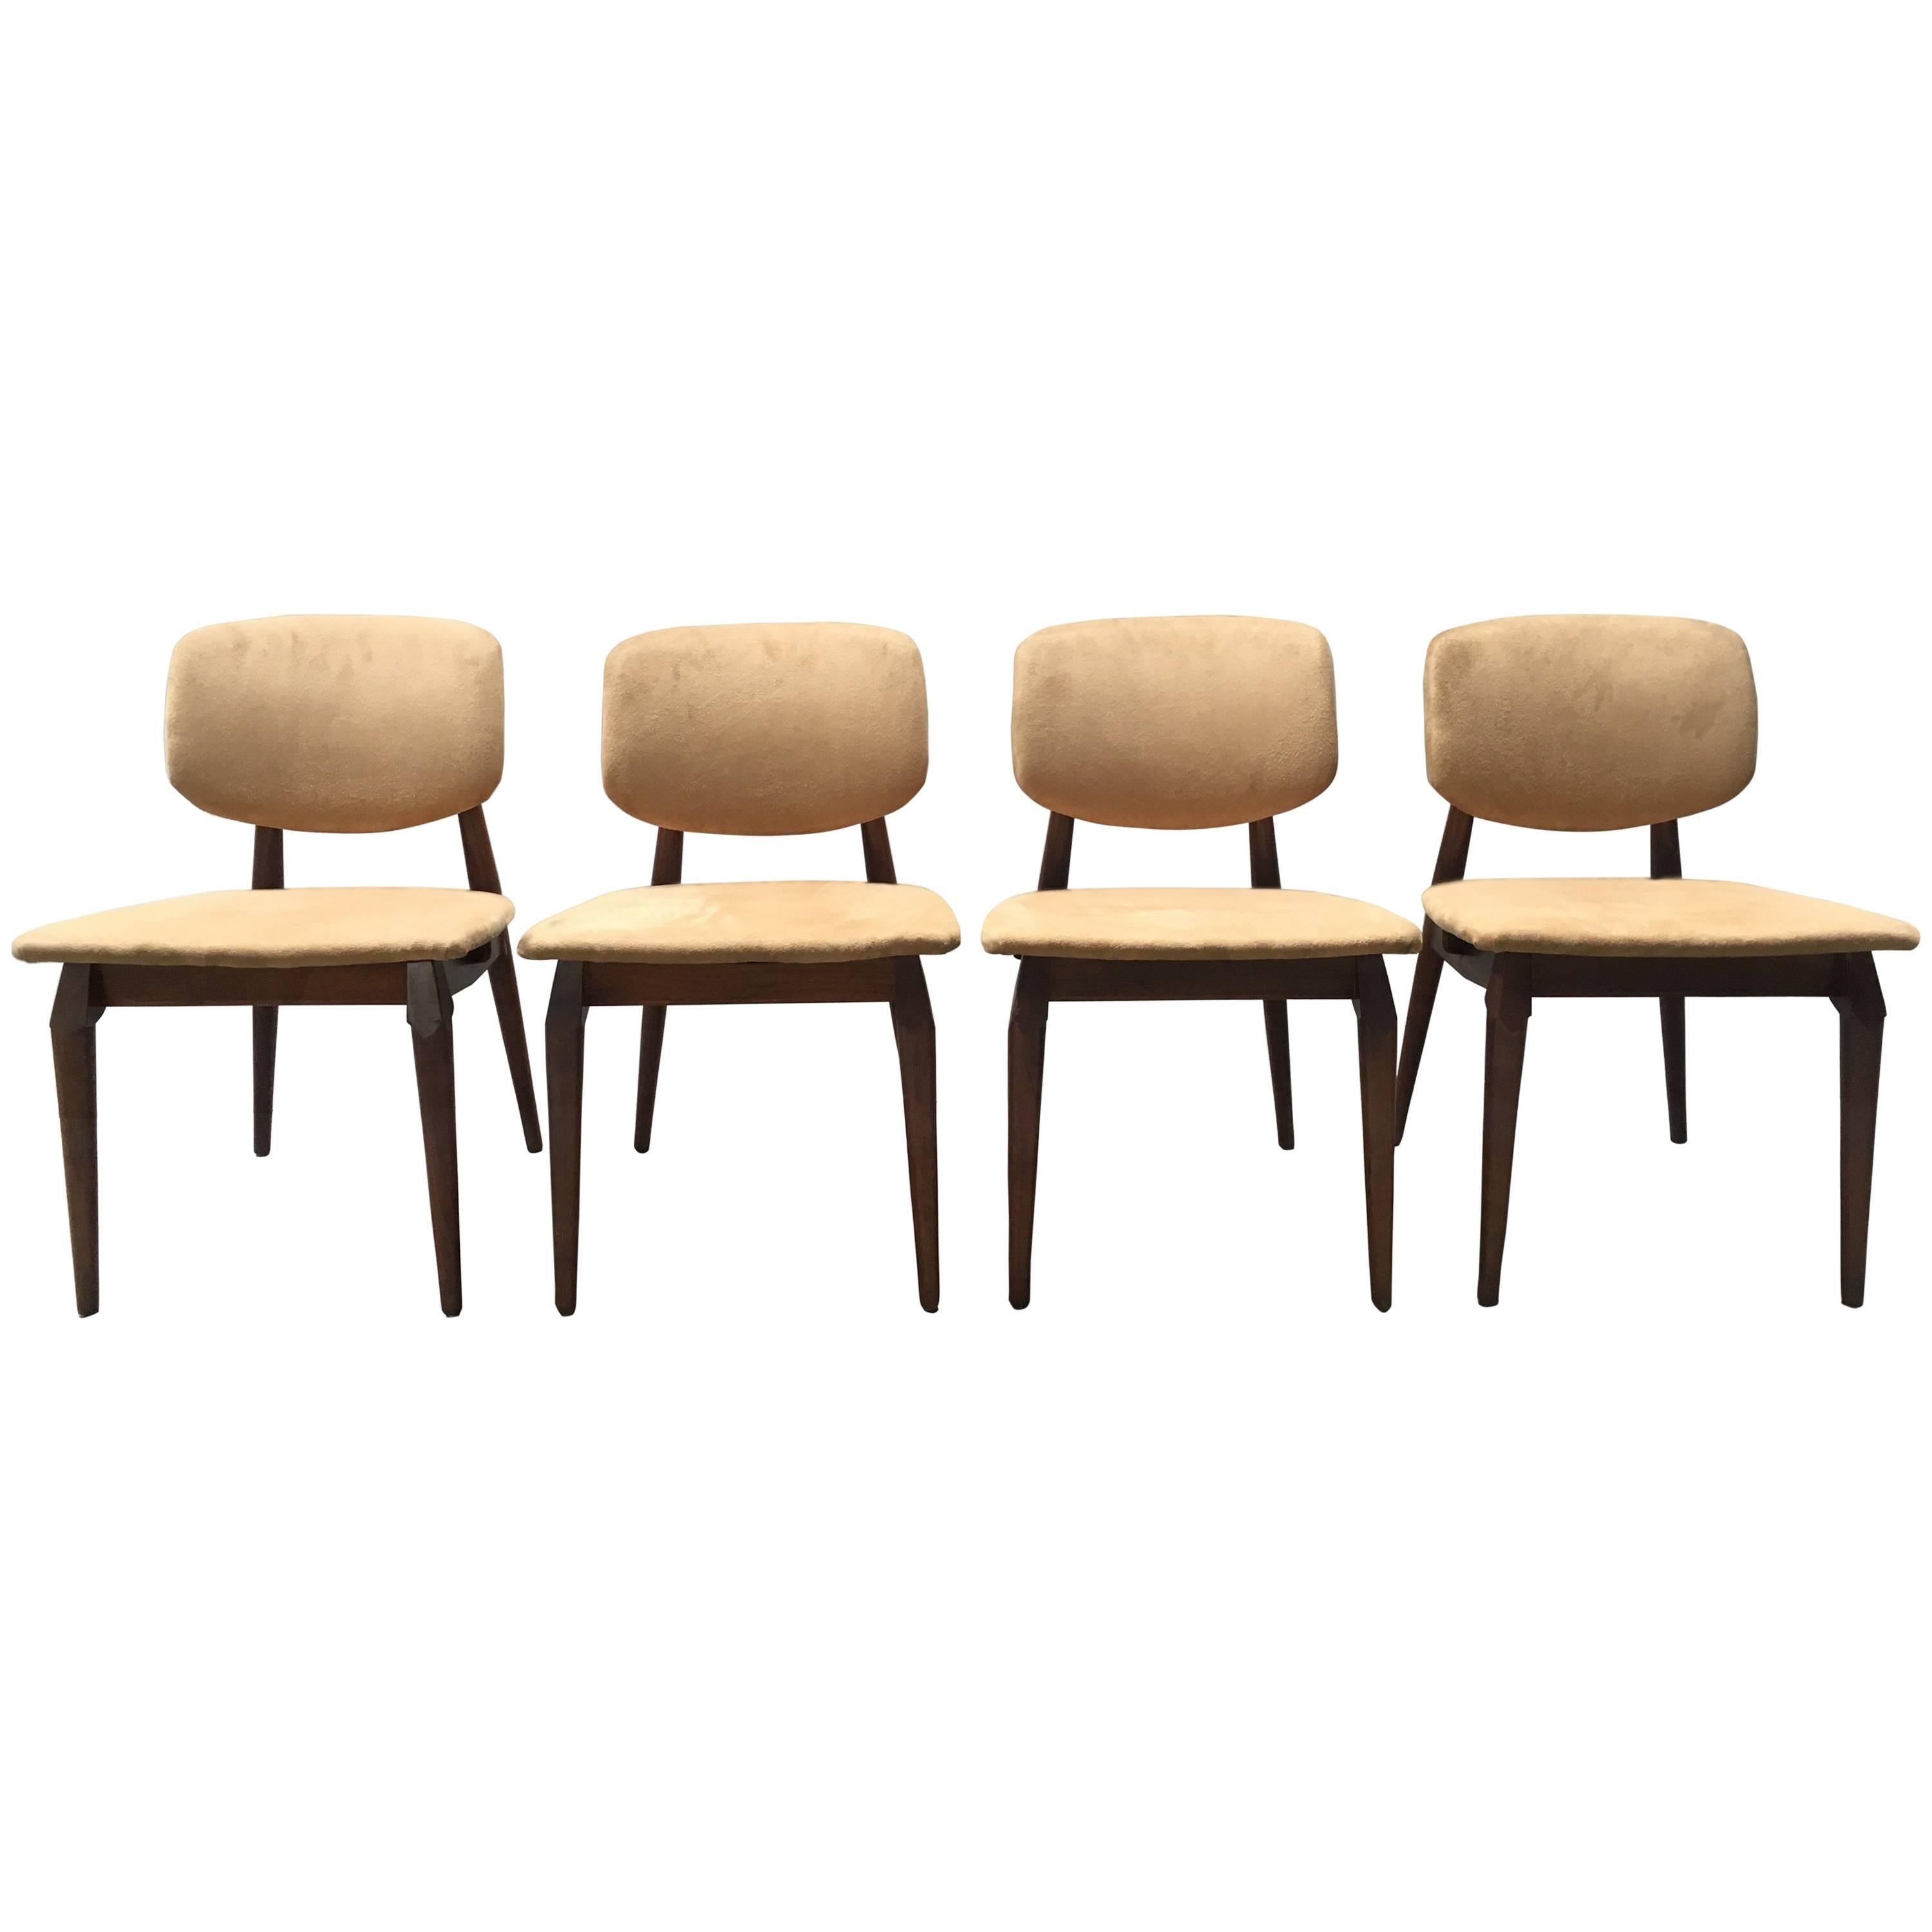 Midcentury Teak Dining Chairs, Set of Four